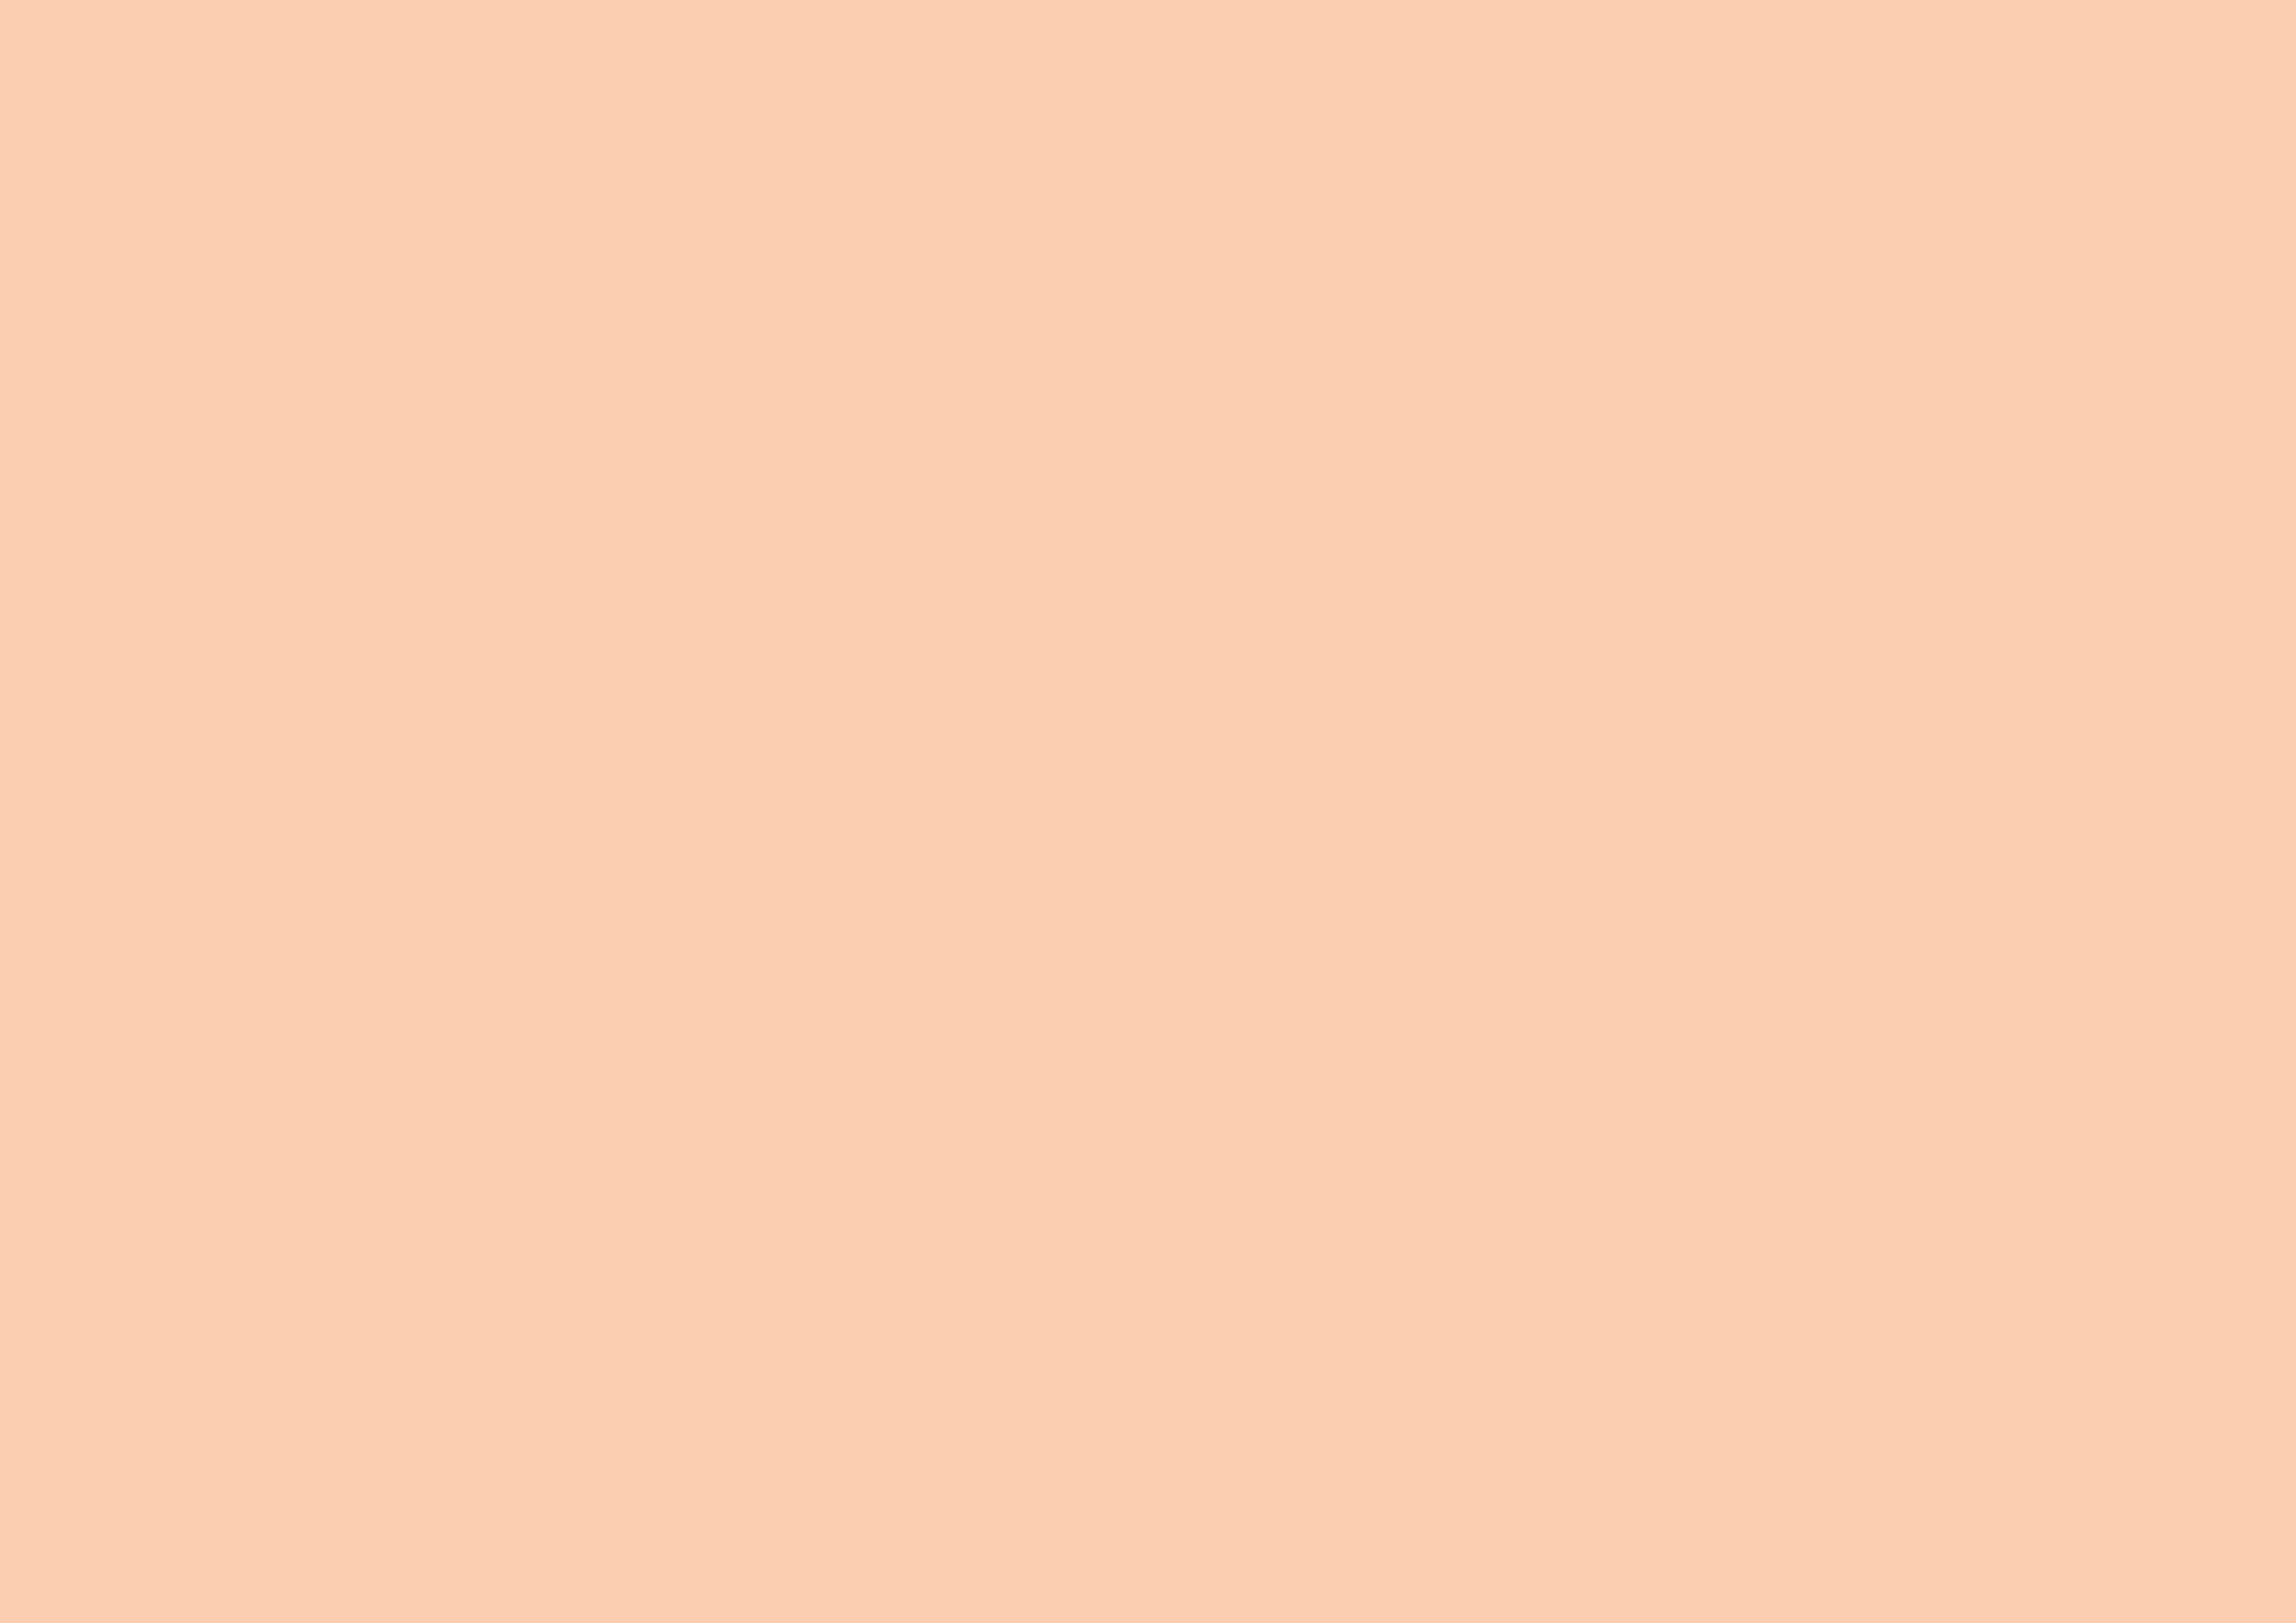 3508x2480 Apricot Solid Color Background